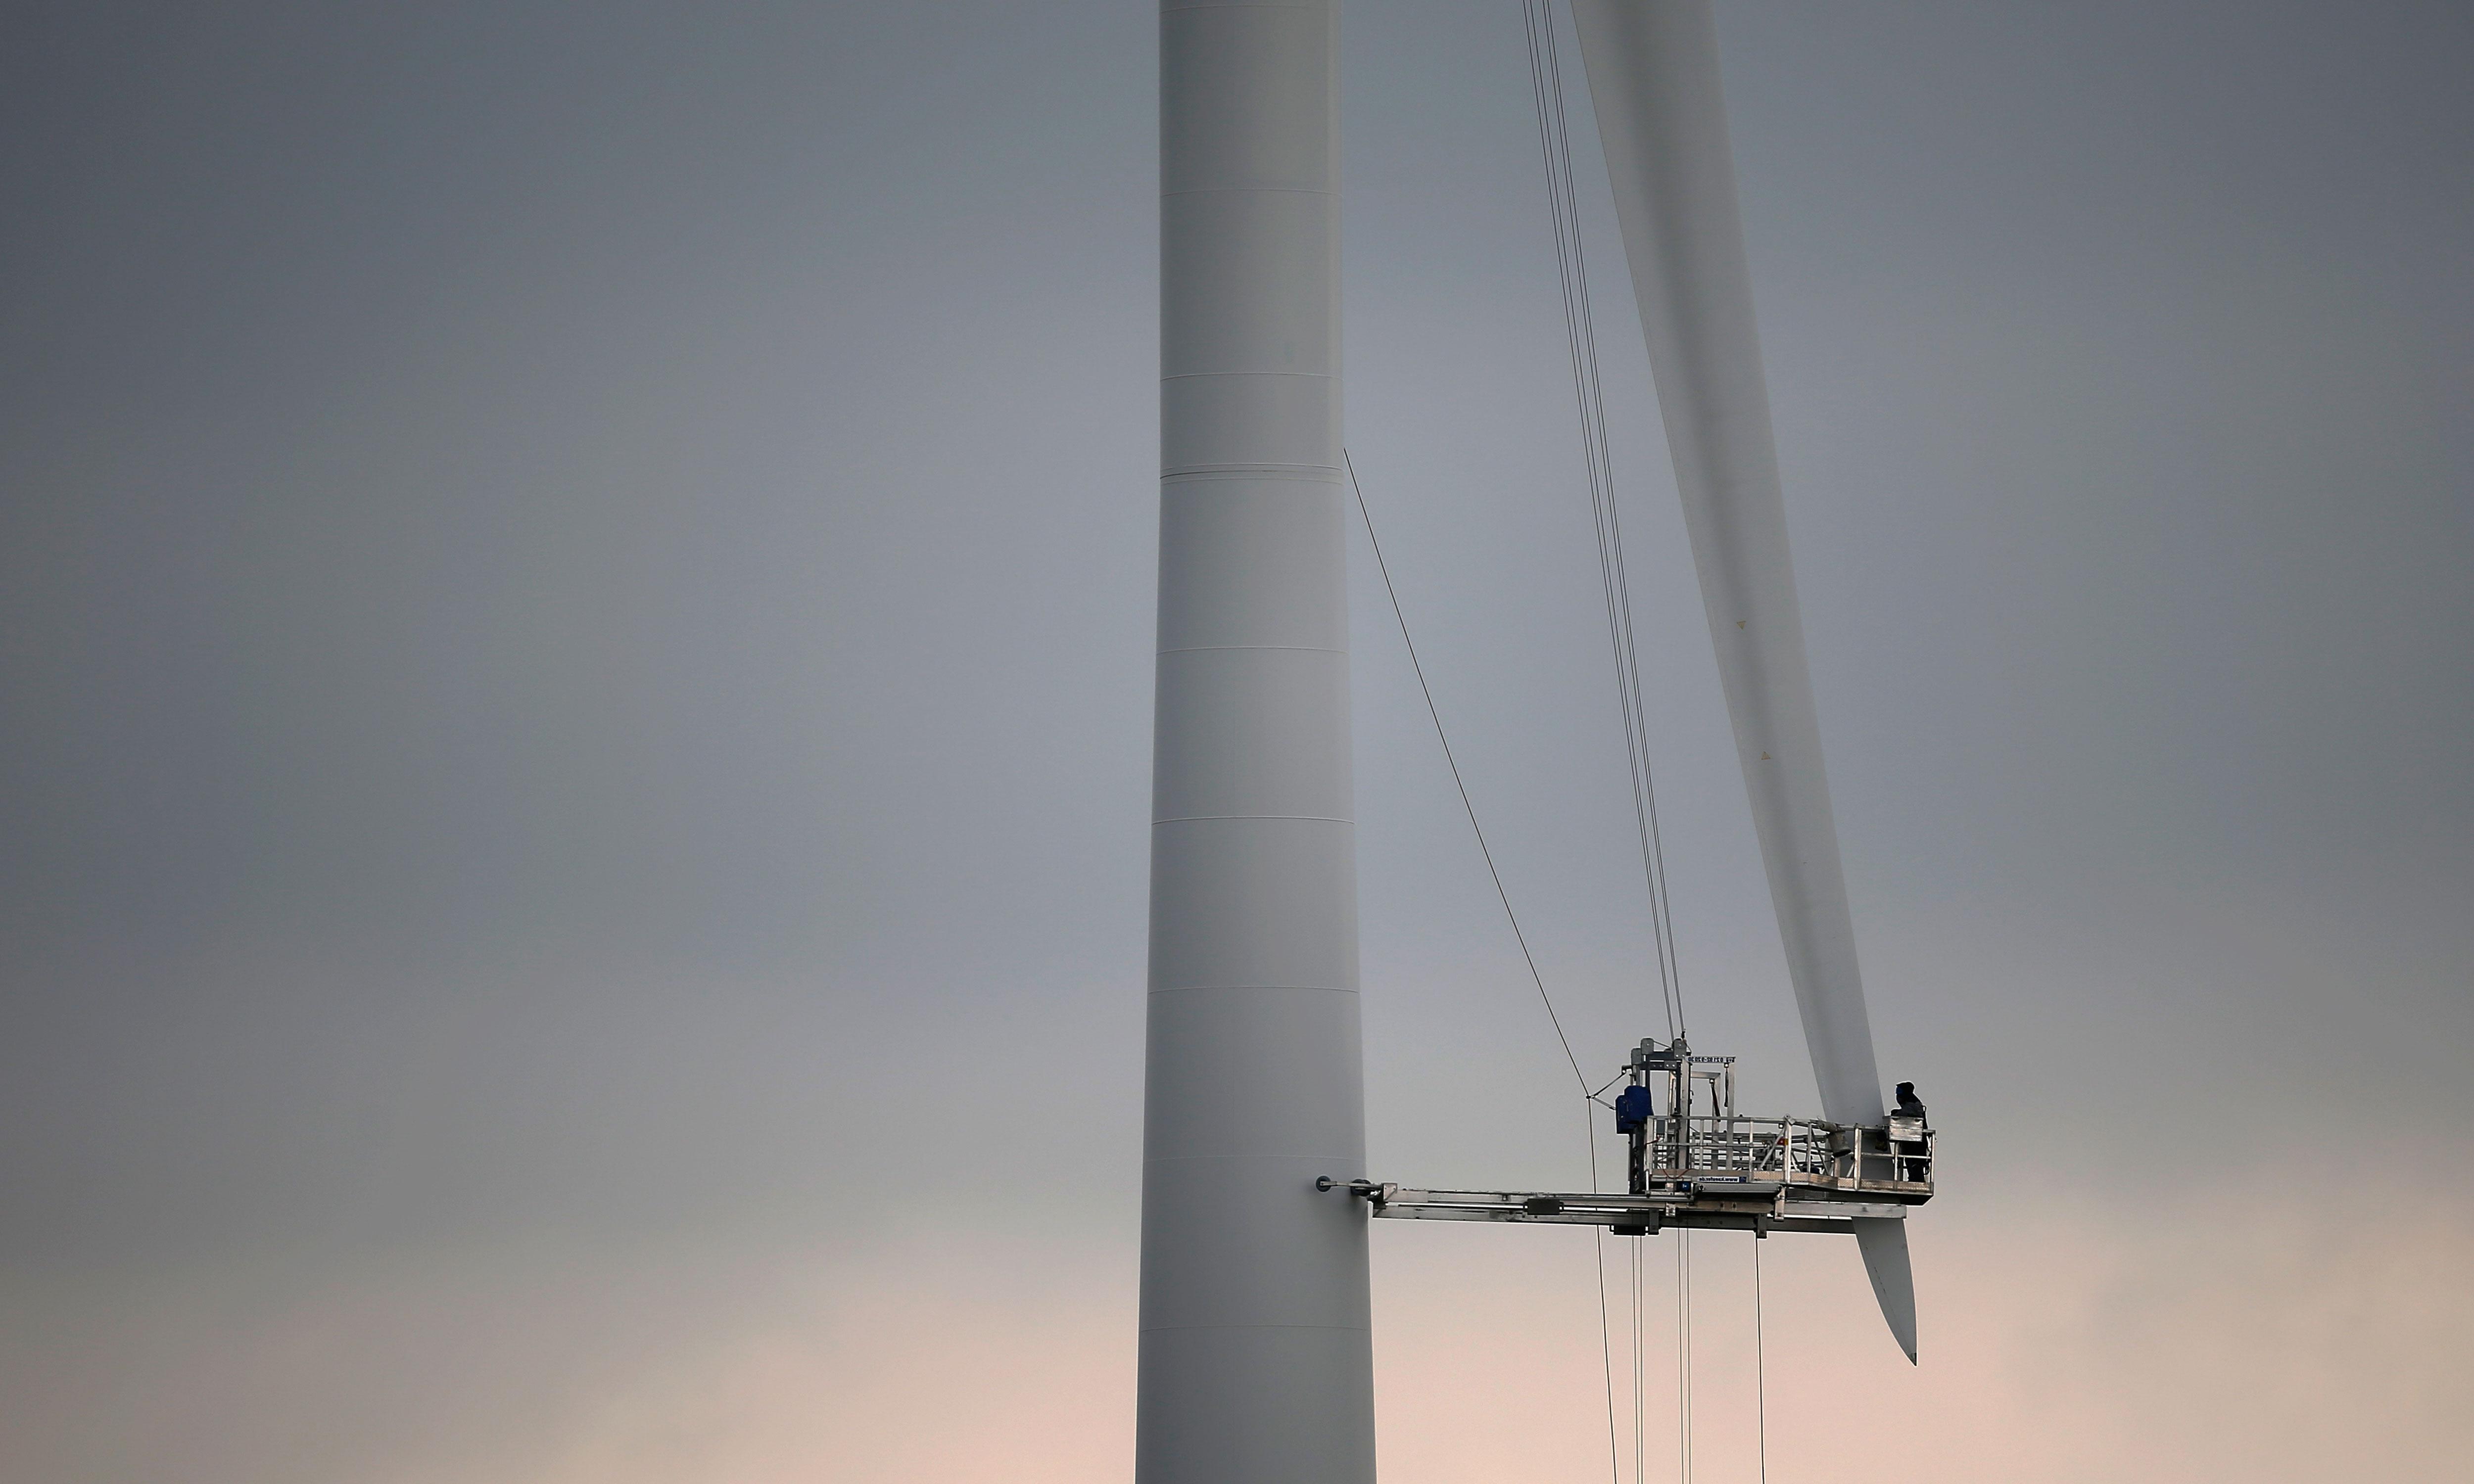 Workers on a ginormous wind turbine